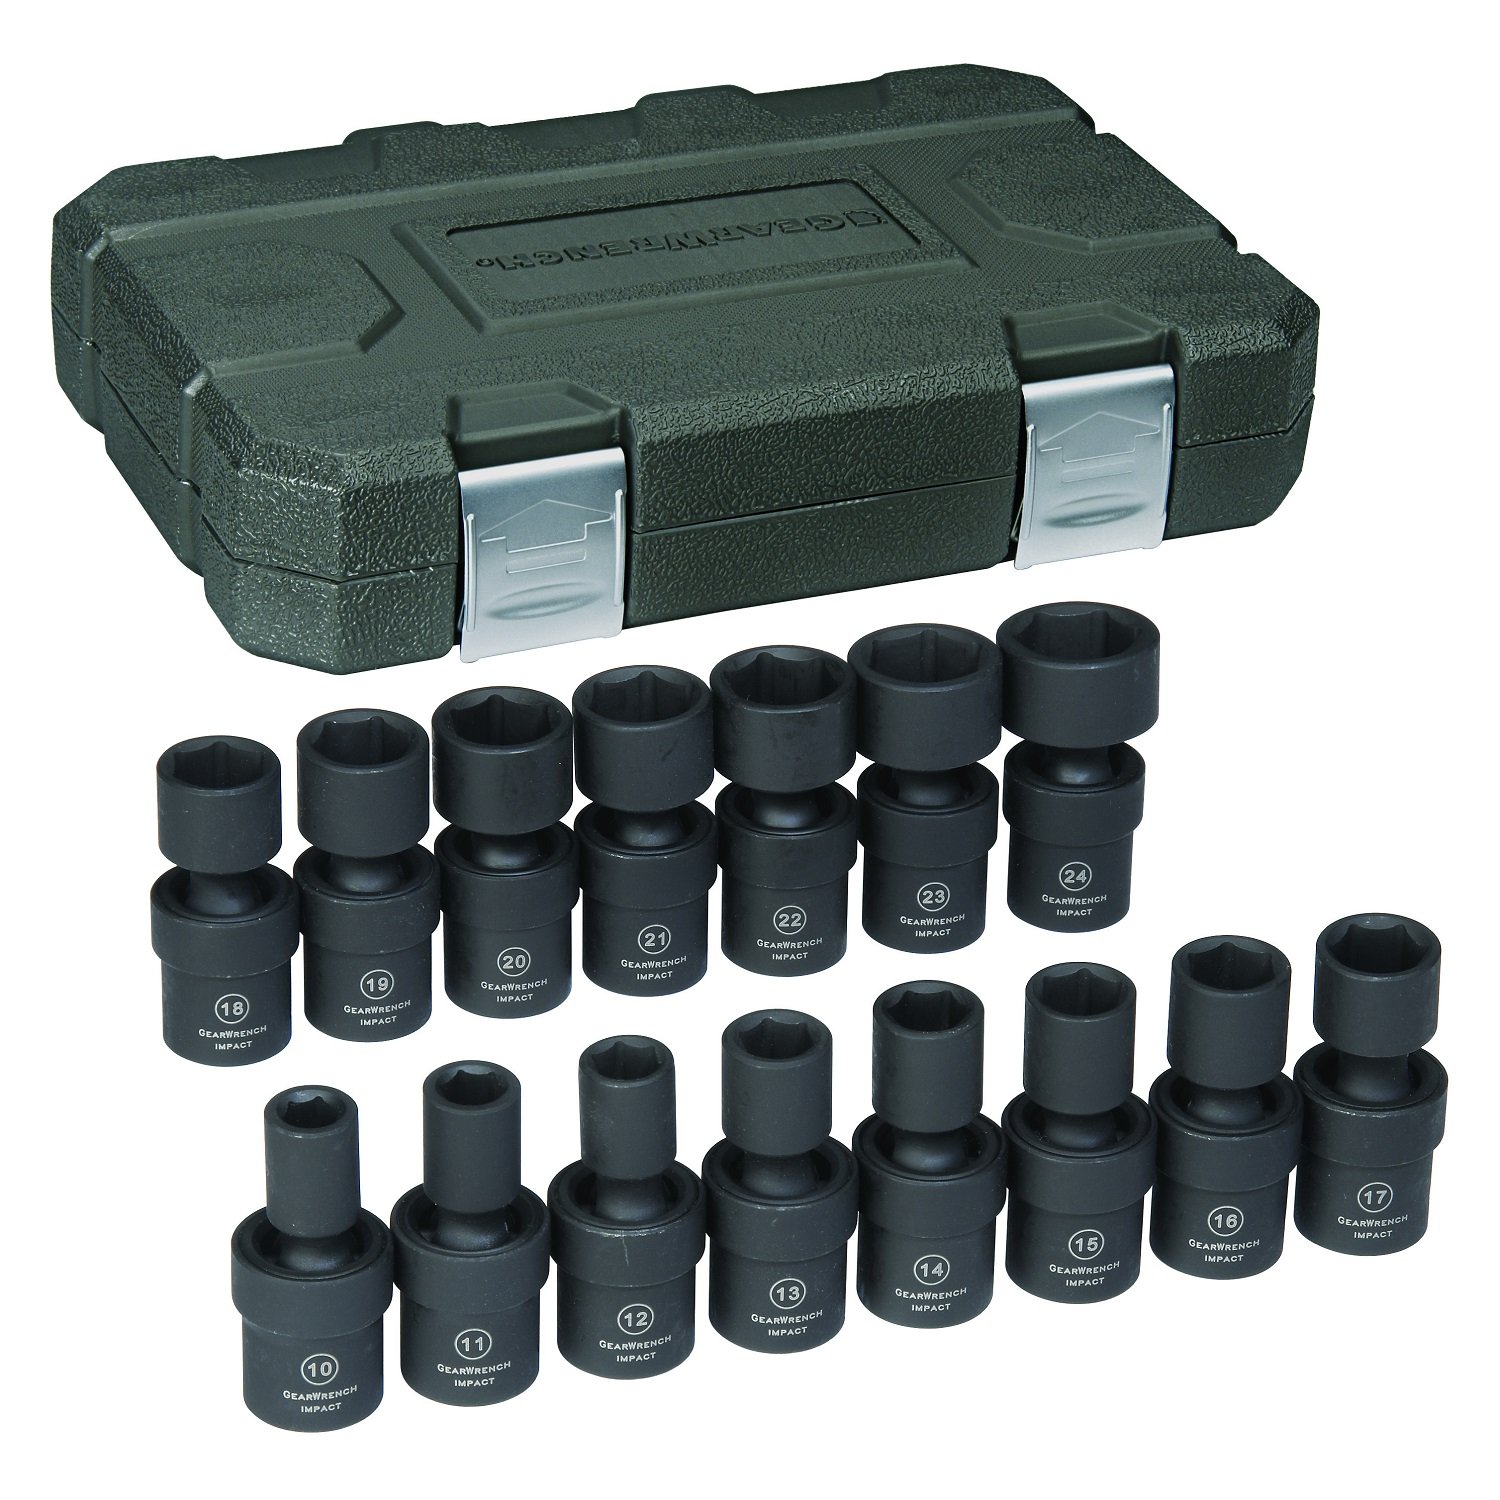 GearWrench 15 Piece 1/2" Drive 6 Point Metric Impact Universal Joint Socket Set 84939